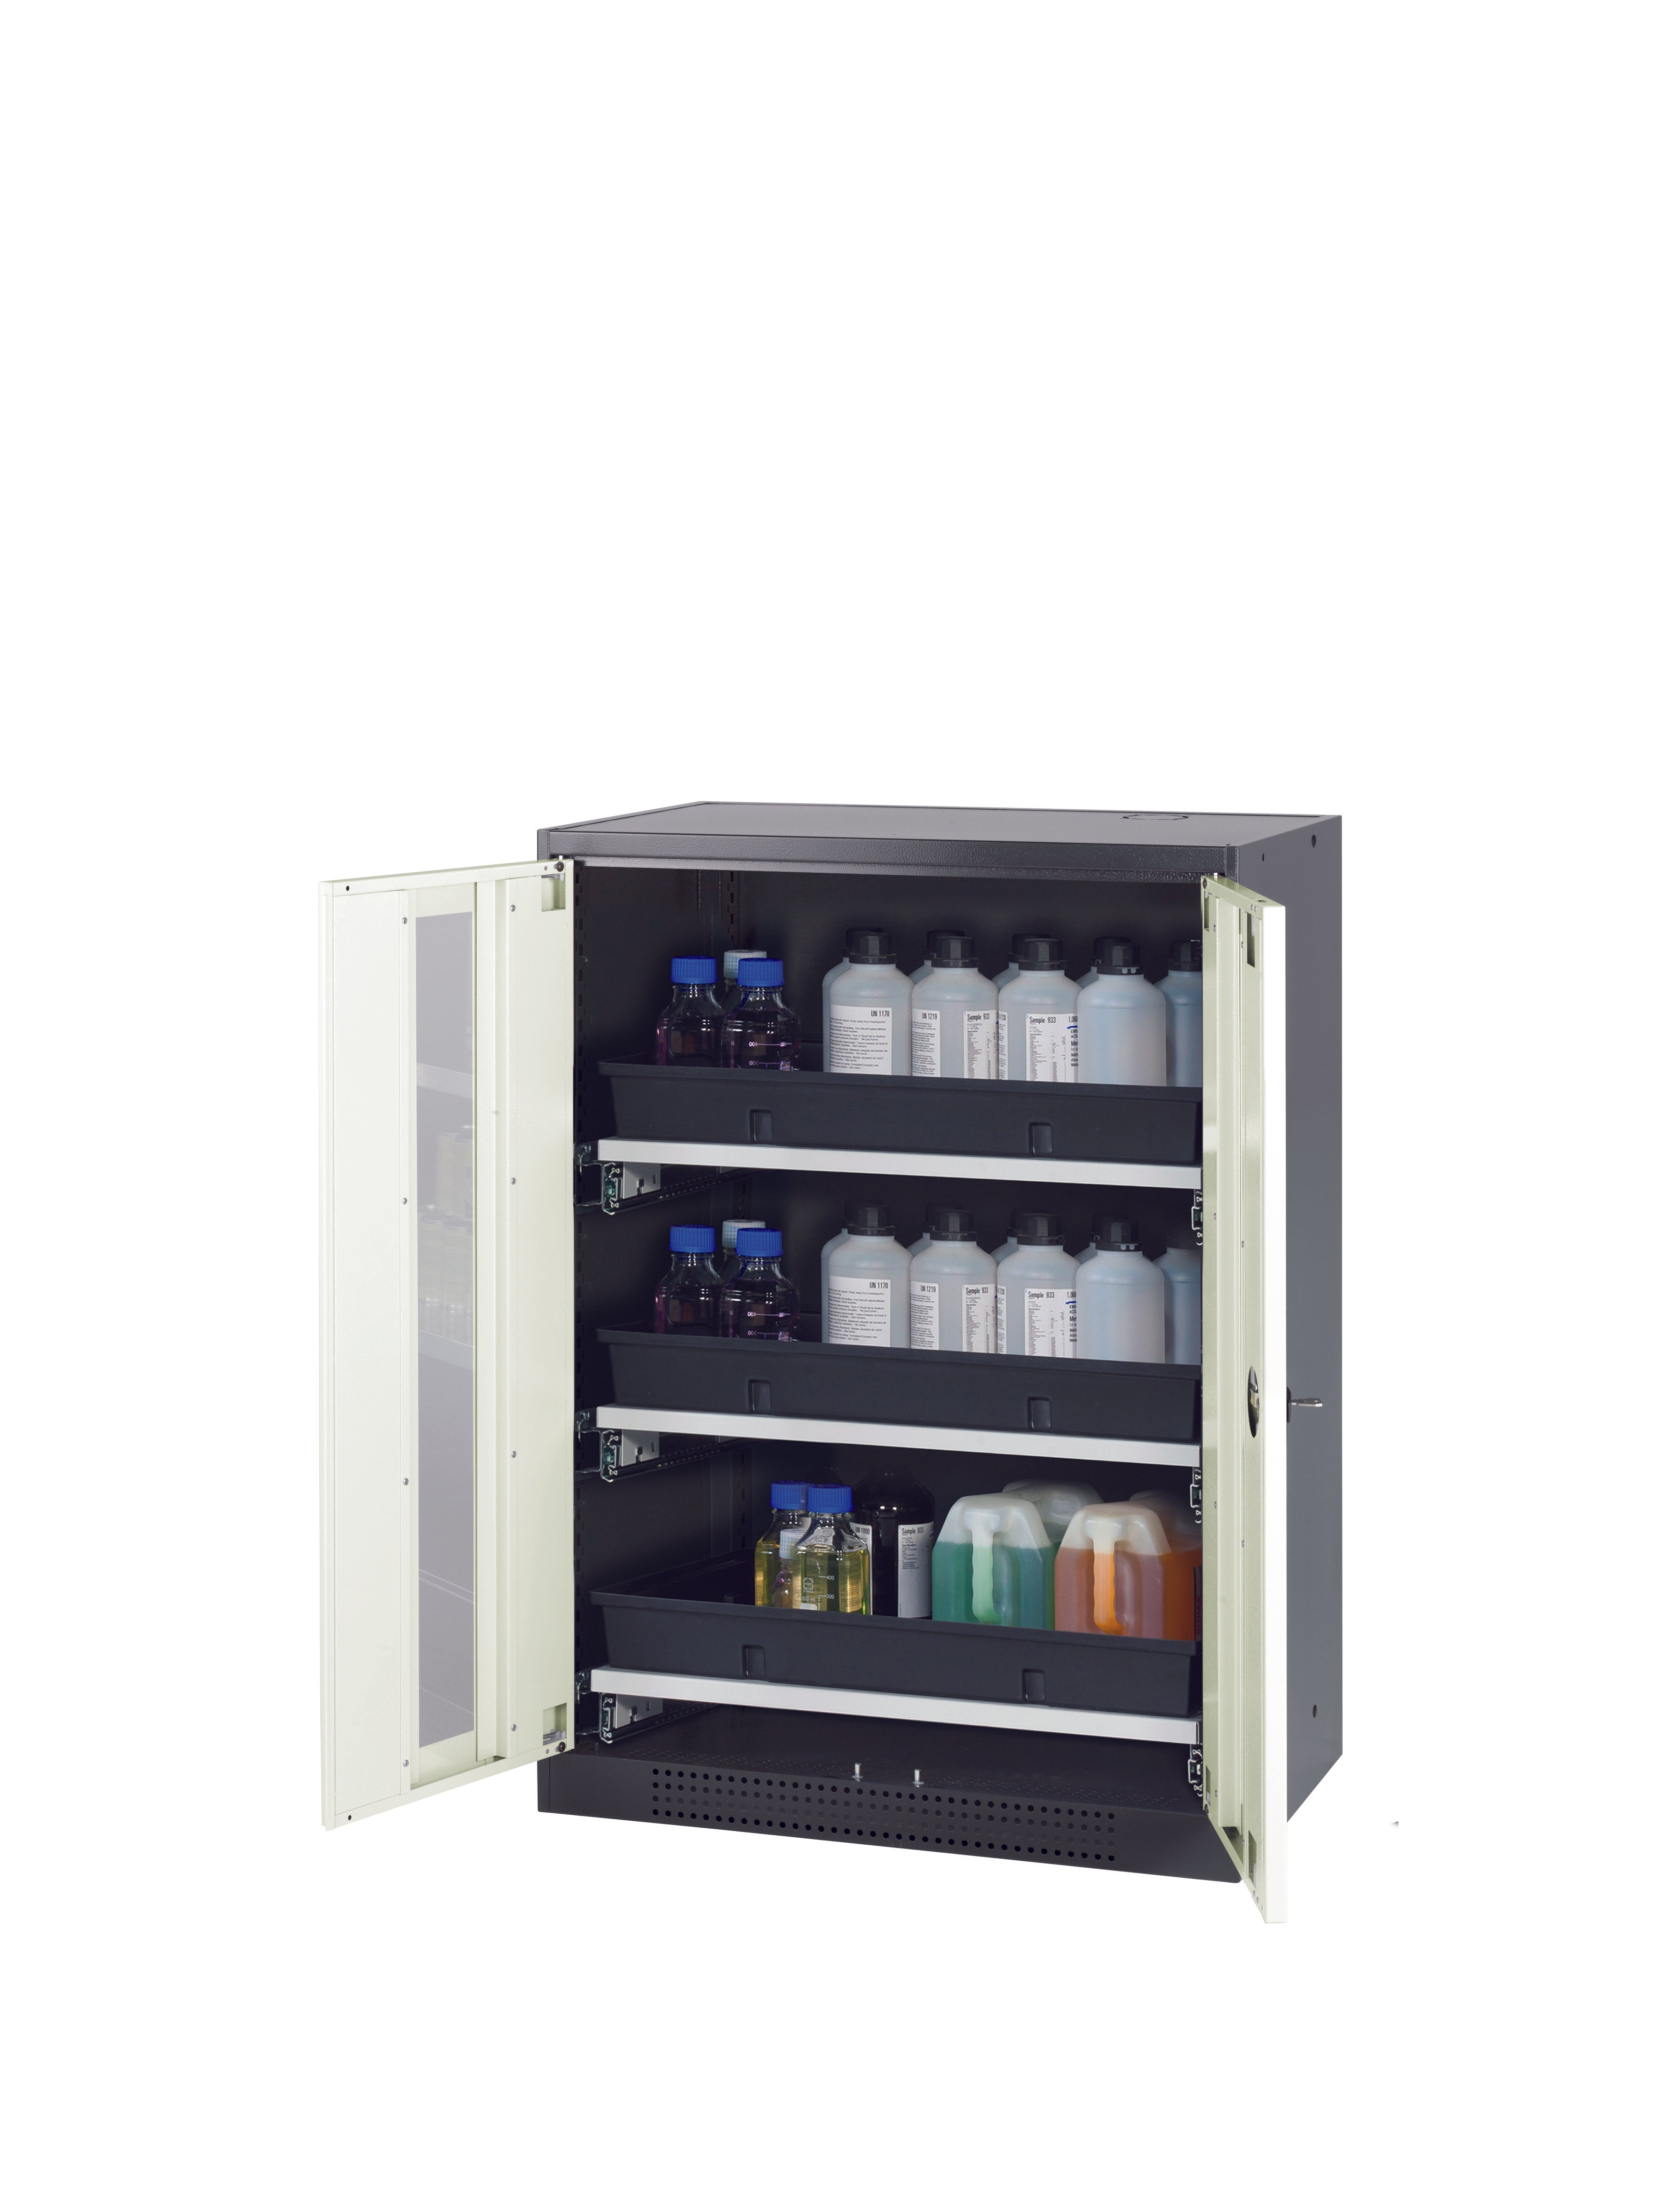 Chemical cabinet CS-CLASSIC-G model CS.110.081.WDFW in pure white RAL 9010 with 3x AbZ pull-out shelves (sheet steel/polypropylene)